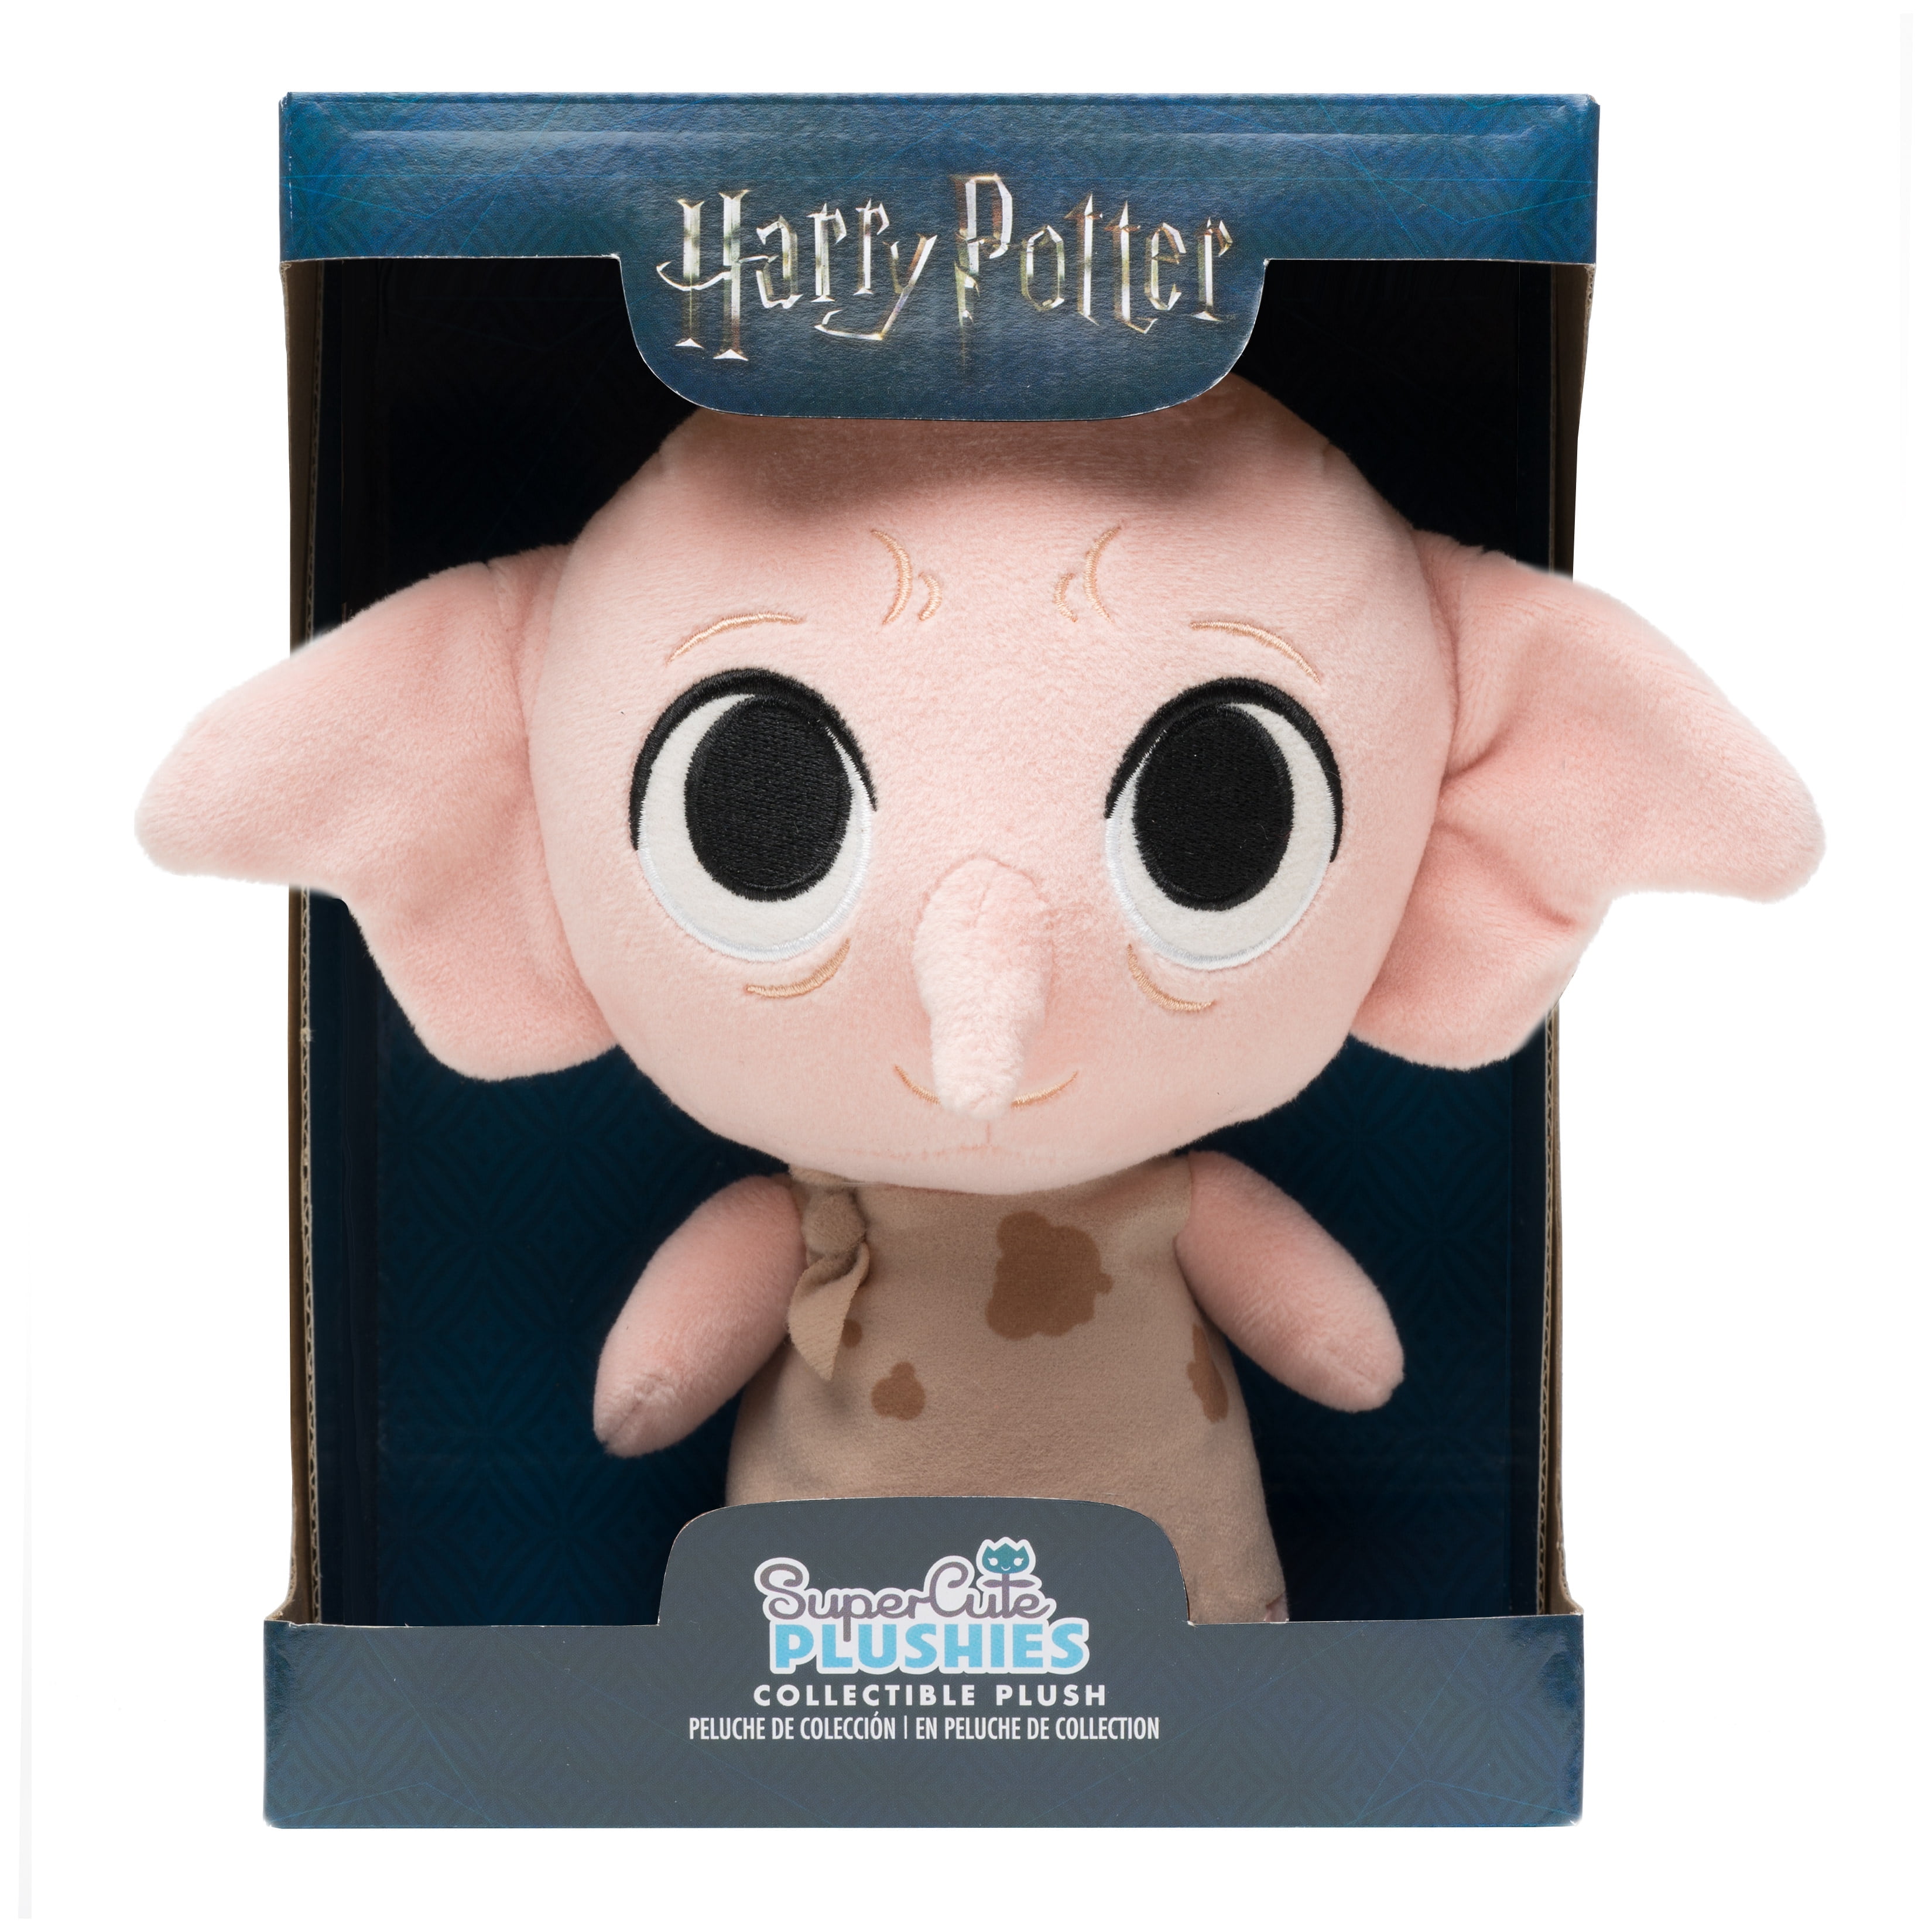 New Harry Potter Beans Dobby Beanie Plush Toy Soft Stuffed Doll 3" Cuddly Gift 